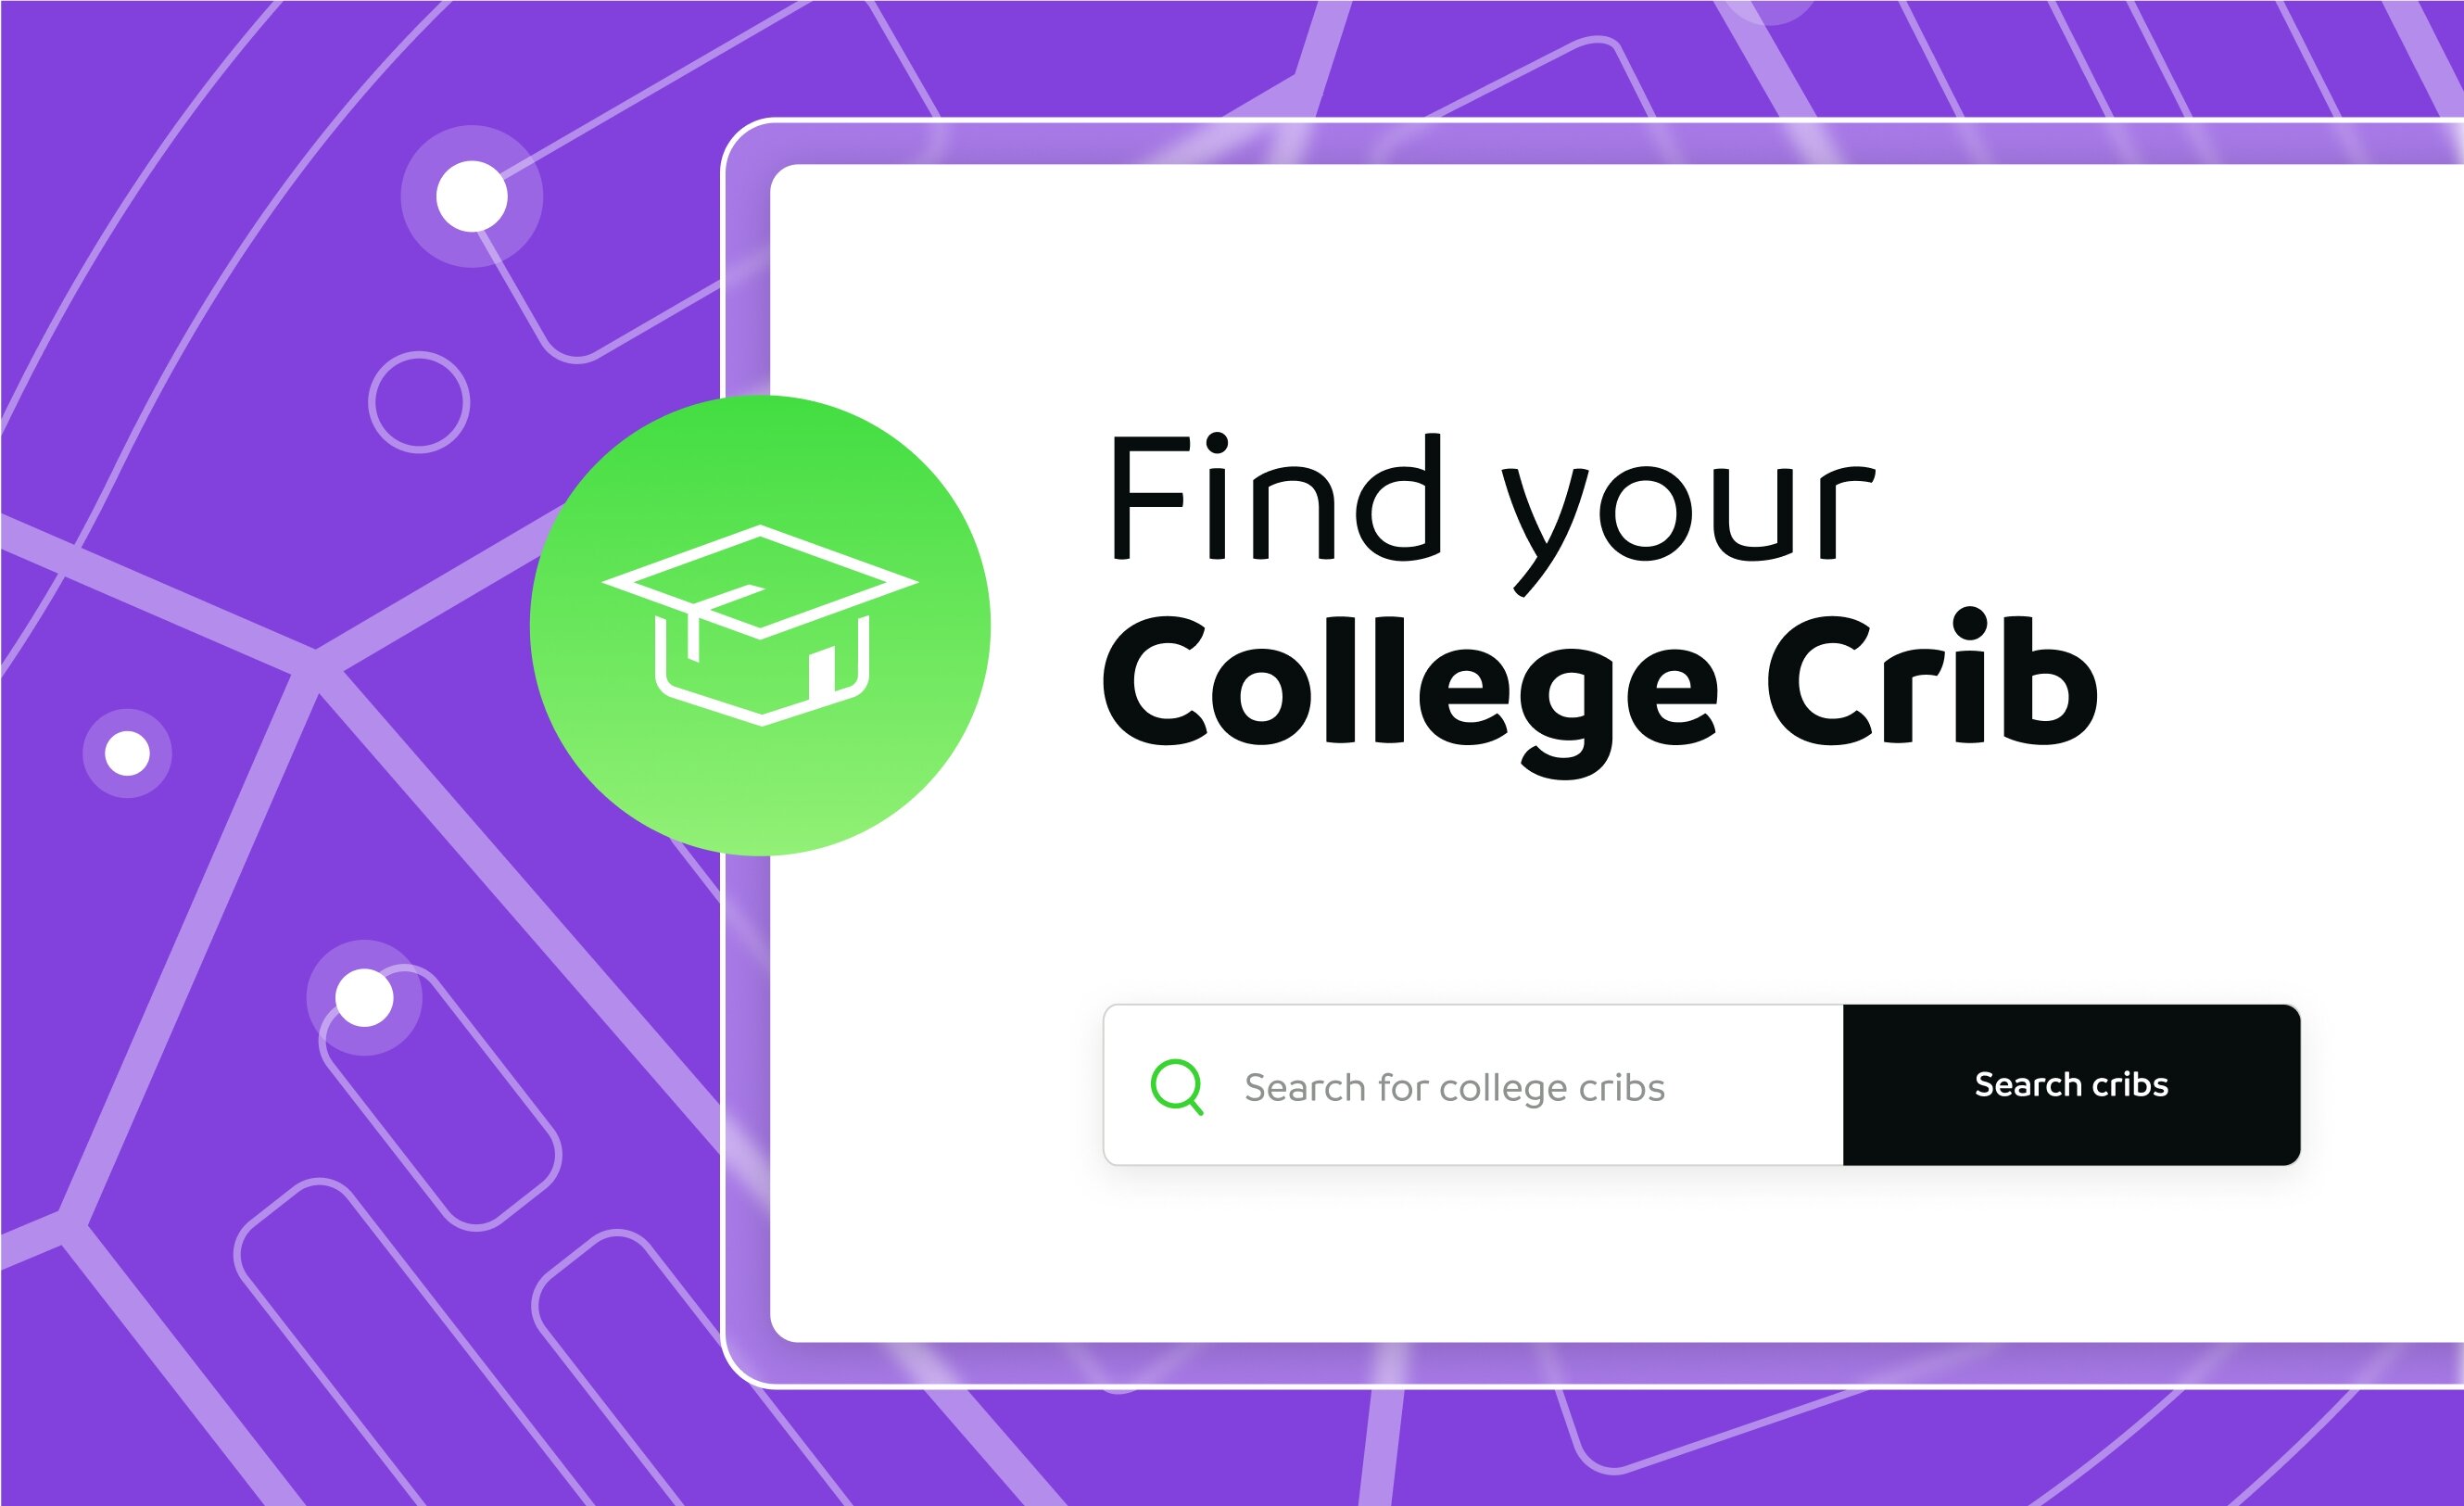 Portfolio cover featuring the College Cribs logo and a simplified map on a purple background